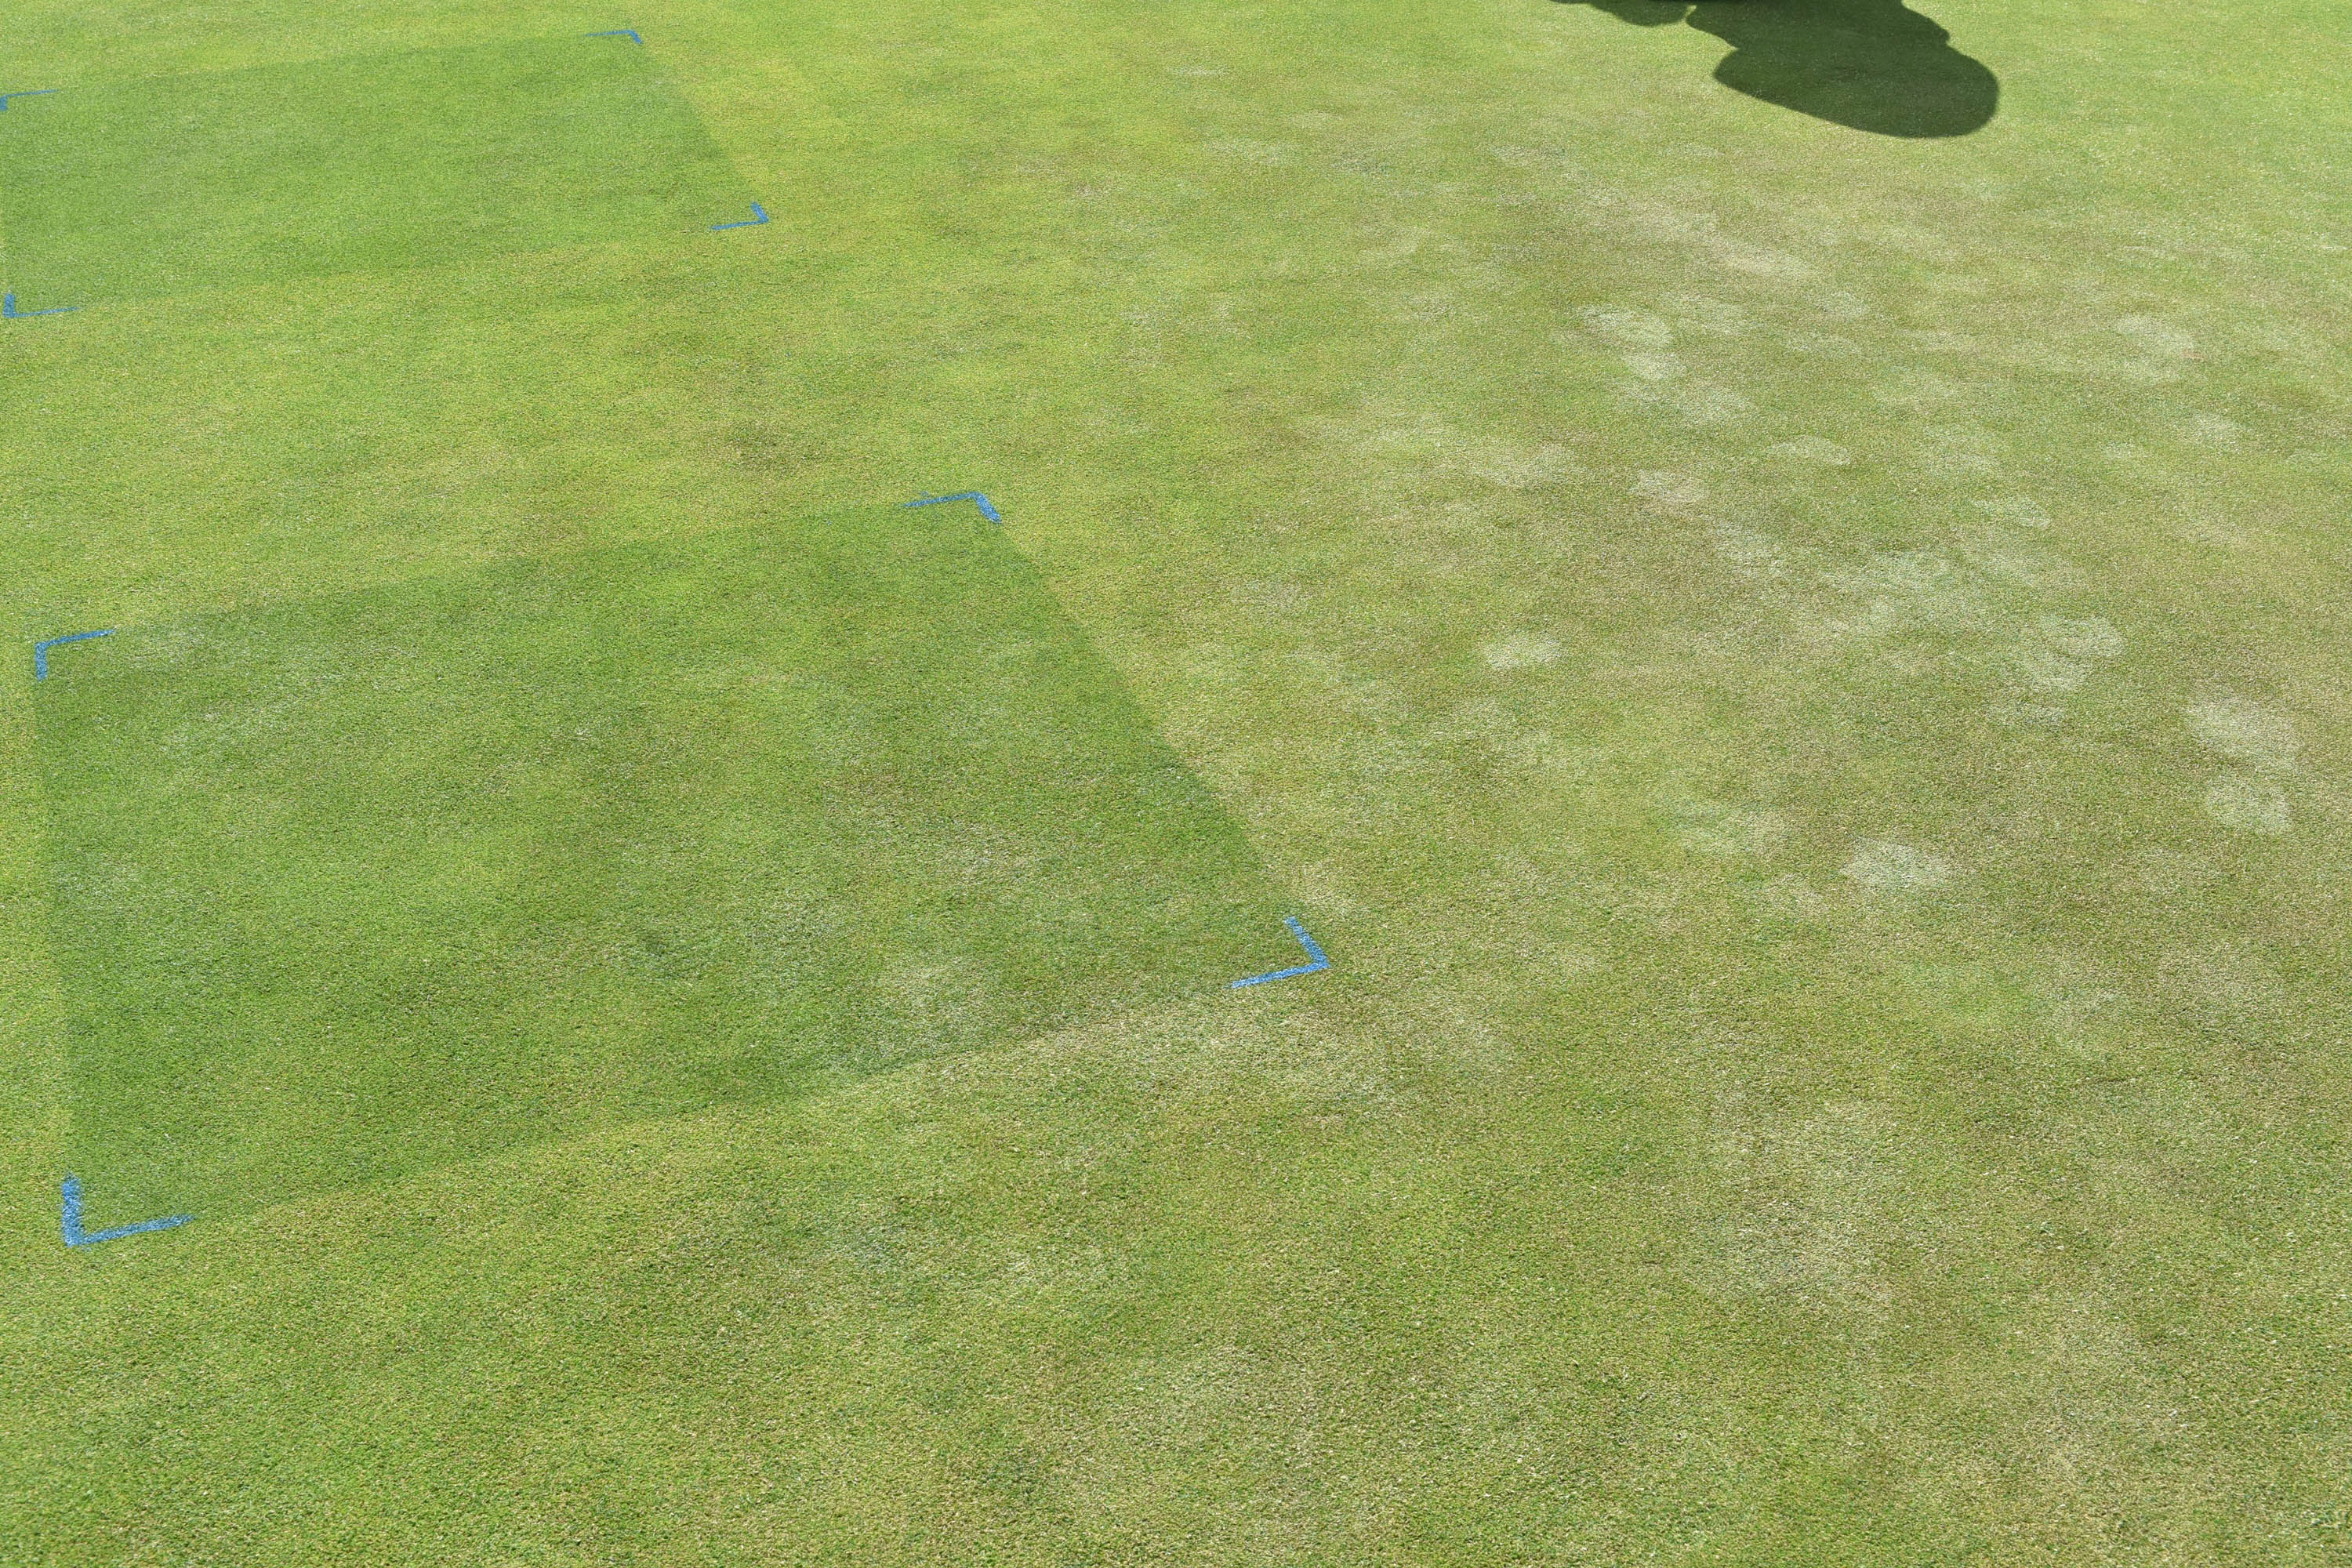 Stressed greens turf show effects of footmarks - compared to treated in Ryder trial demo at Turf Science Lite 2018 - Old Thorns Liphook mr